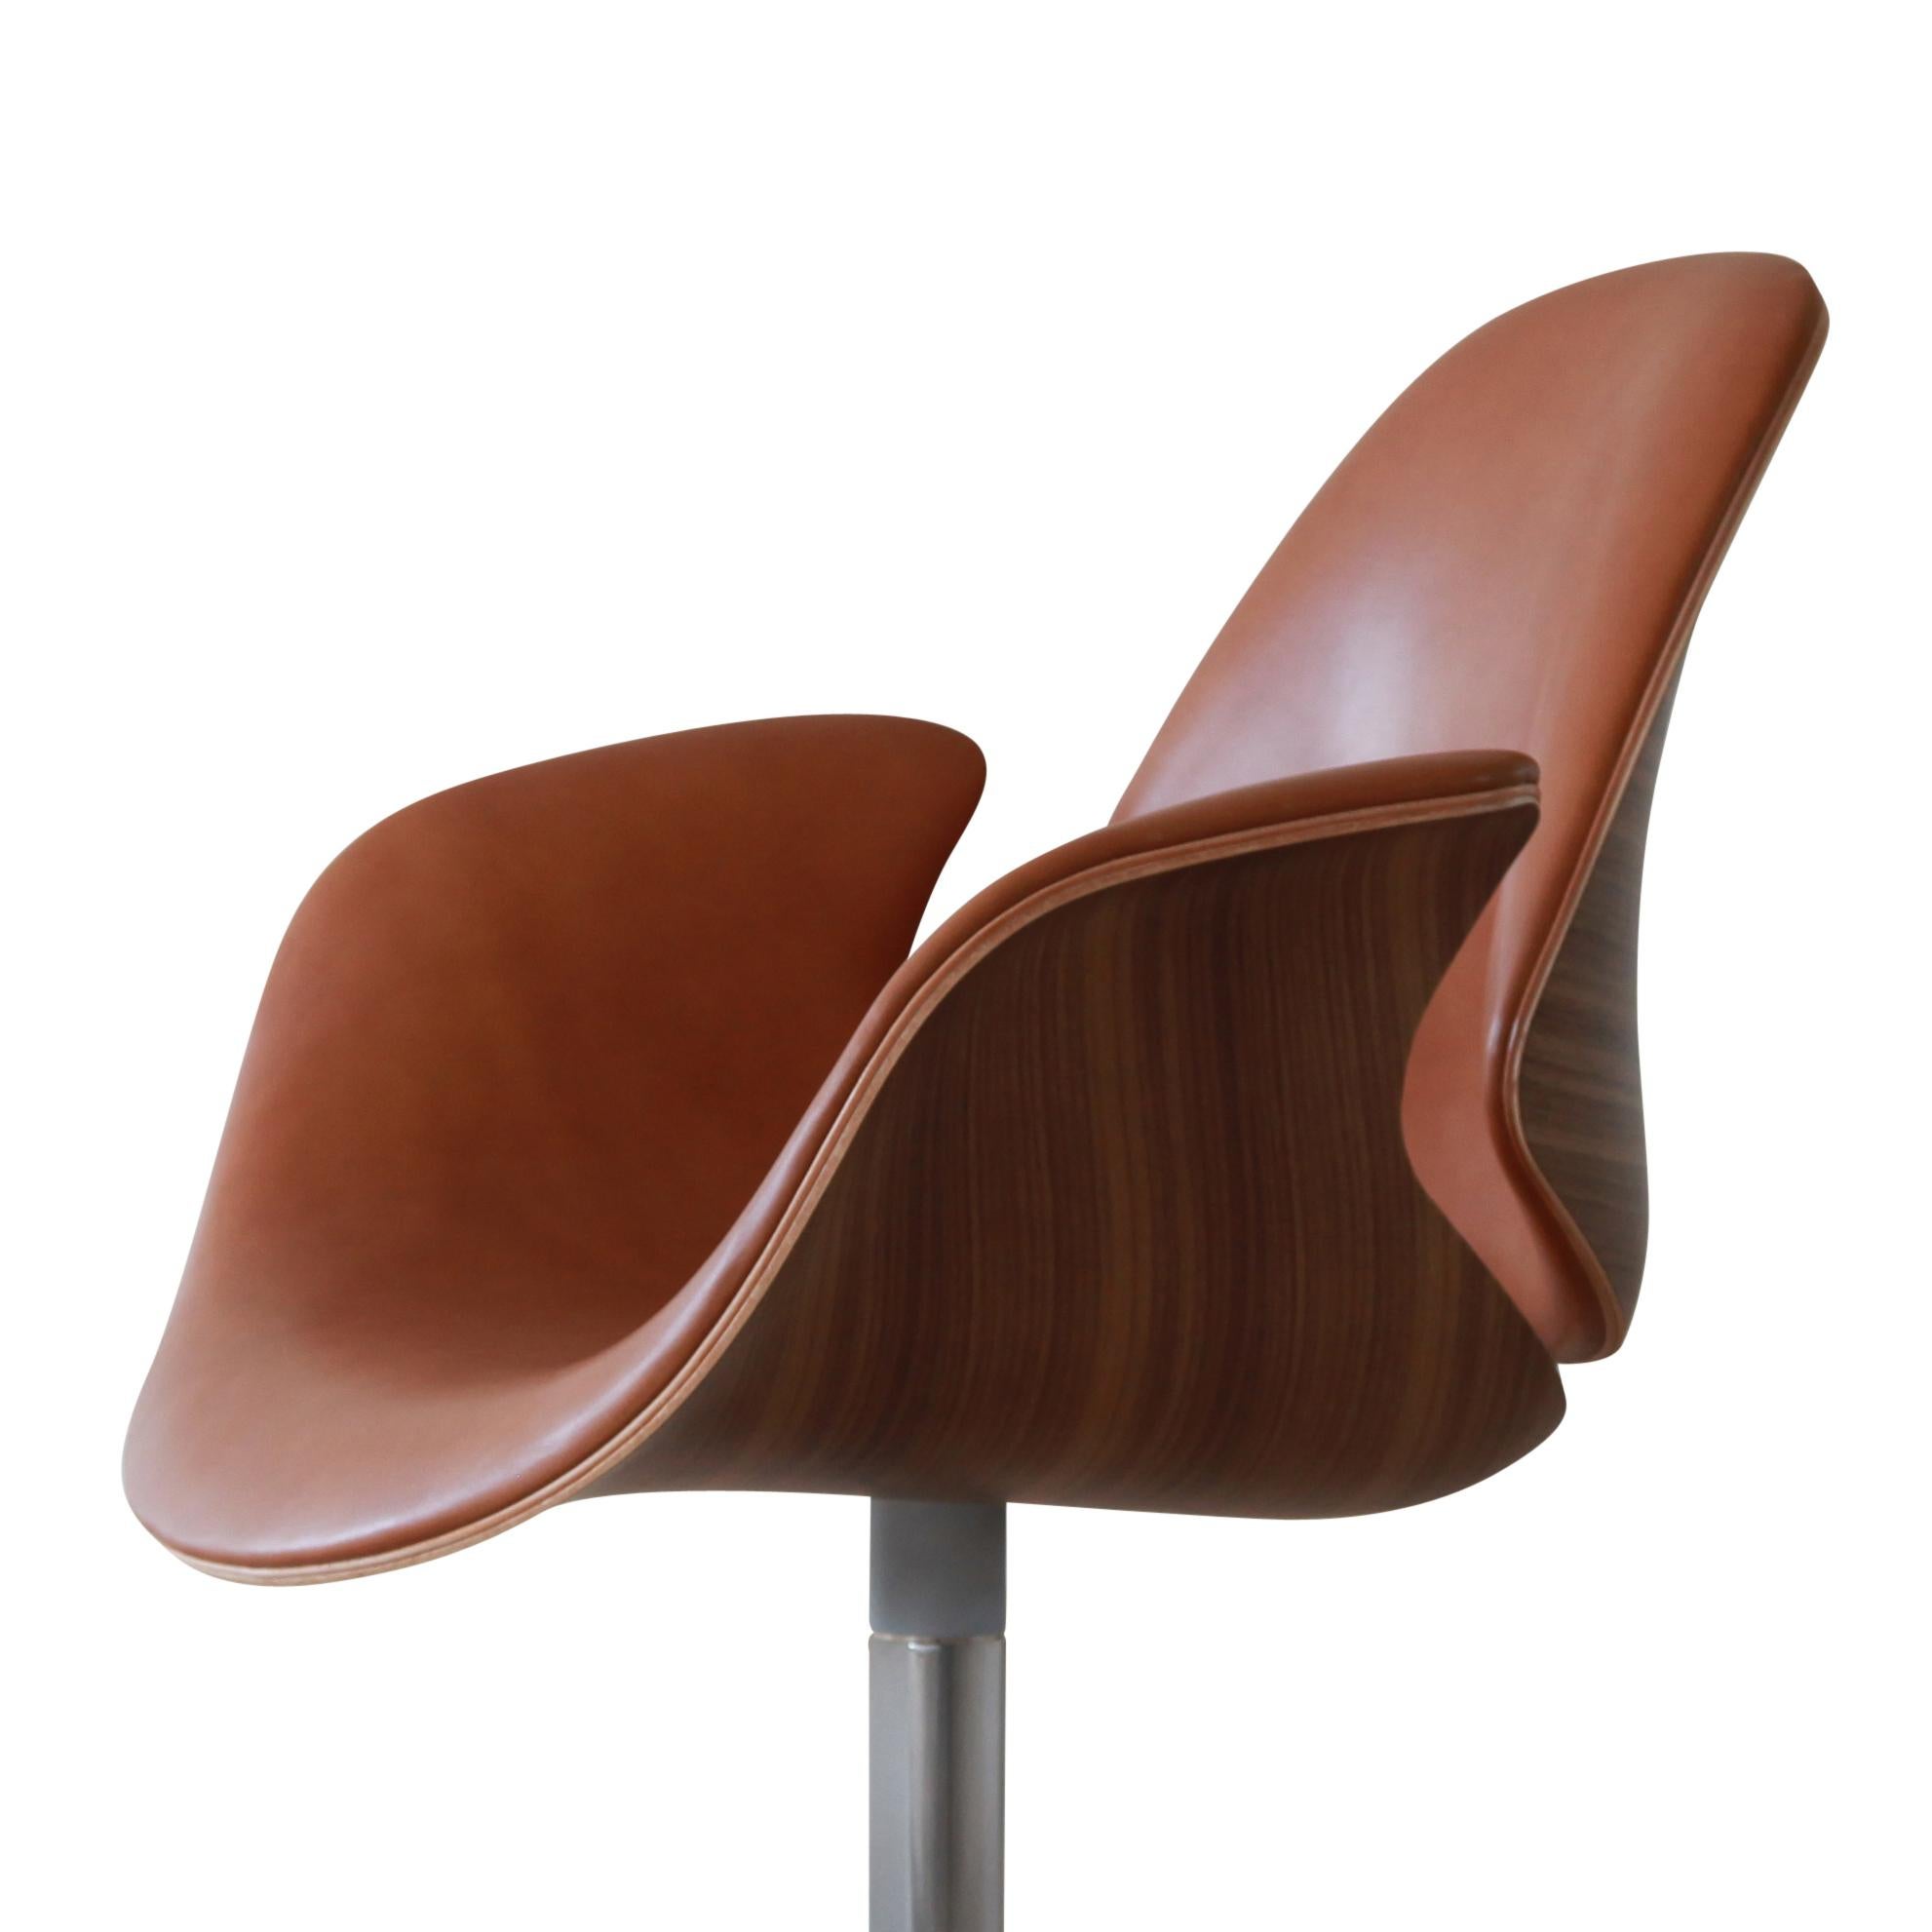 The Council chair was designed in 2011 by Kasper Salto and Thomas Sigsgaard for the Trusteeship Council Chamber at the U.N. Headquarters in New York.

The chair is well-thought out, shaped specifically with the human body in mind and made in